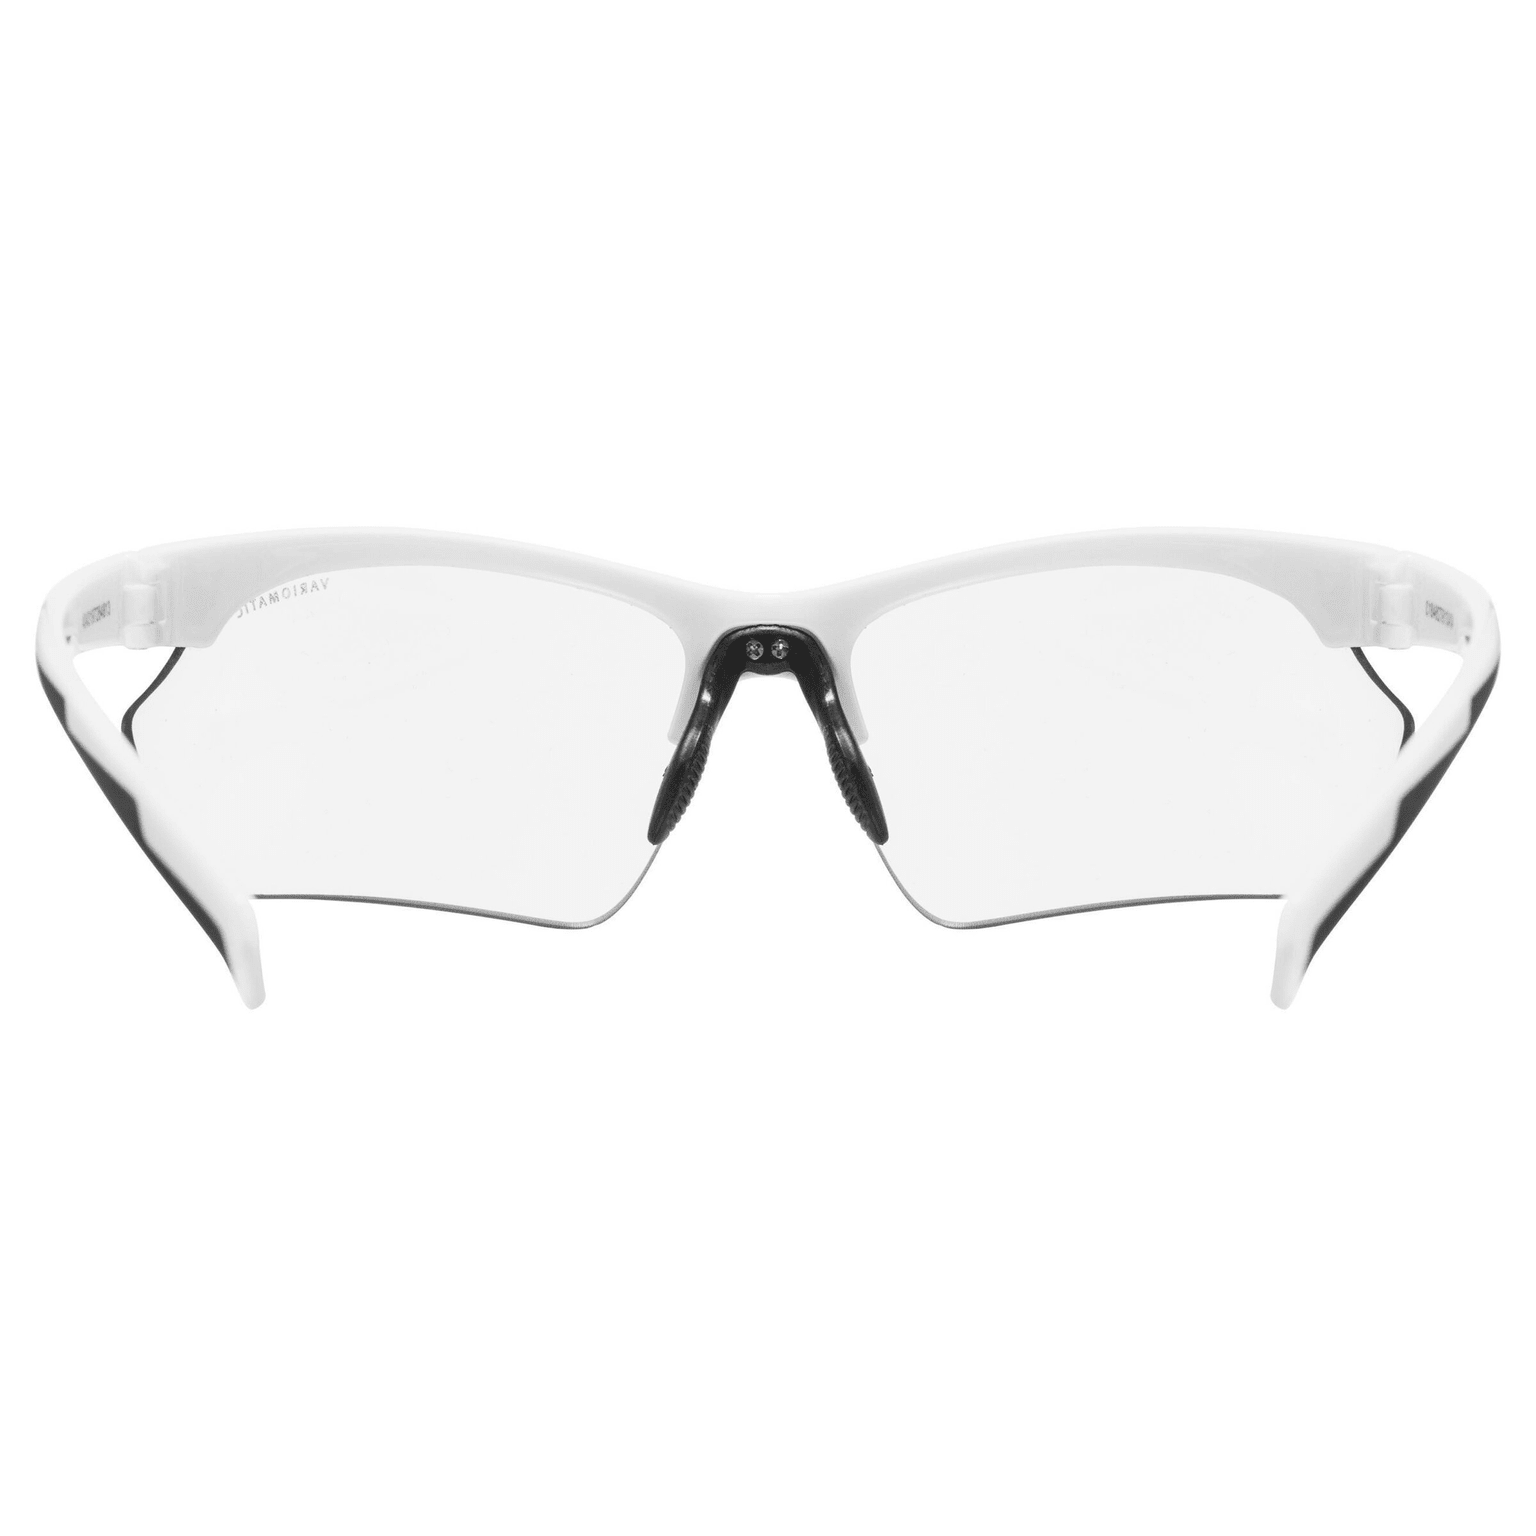 Uvex Uvex Sportstyle 802 V small Lunettes de sport blanc 10